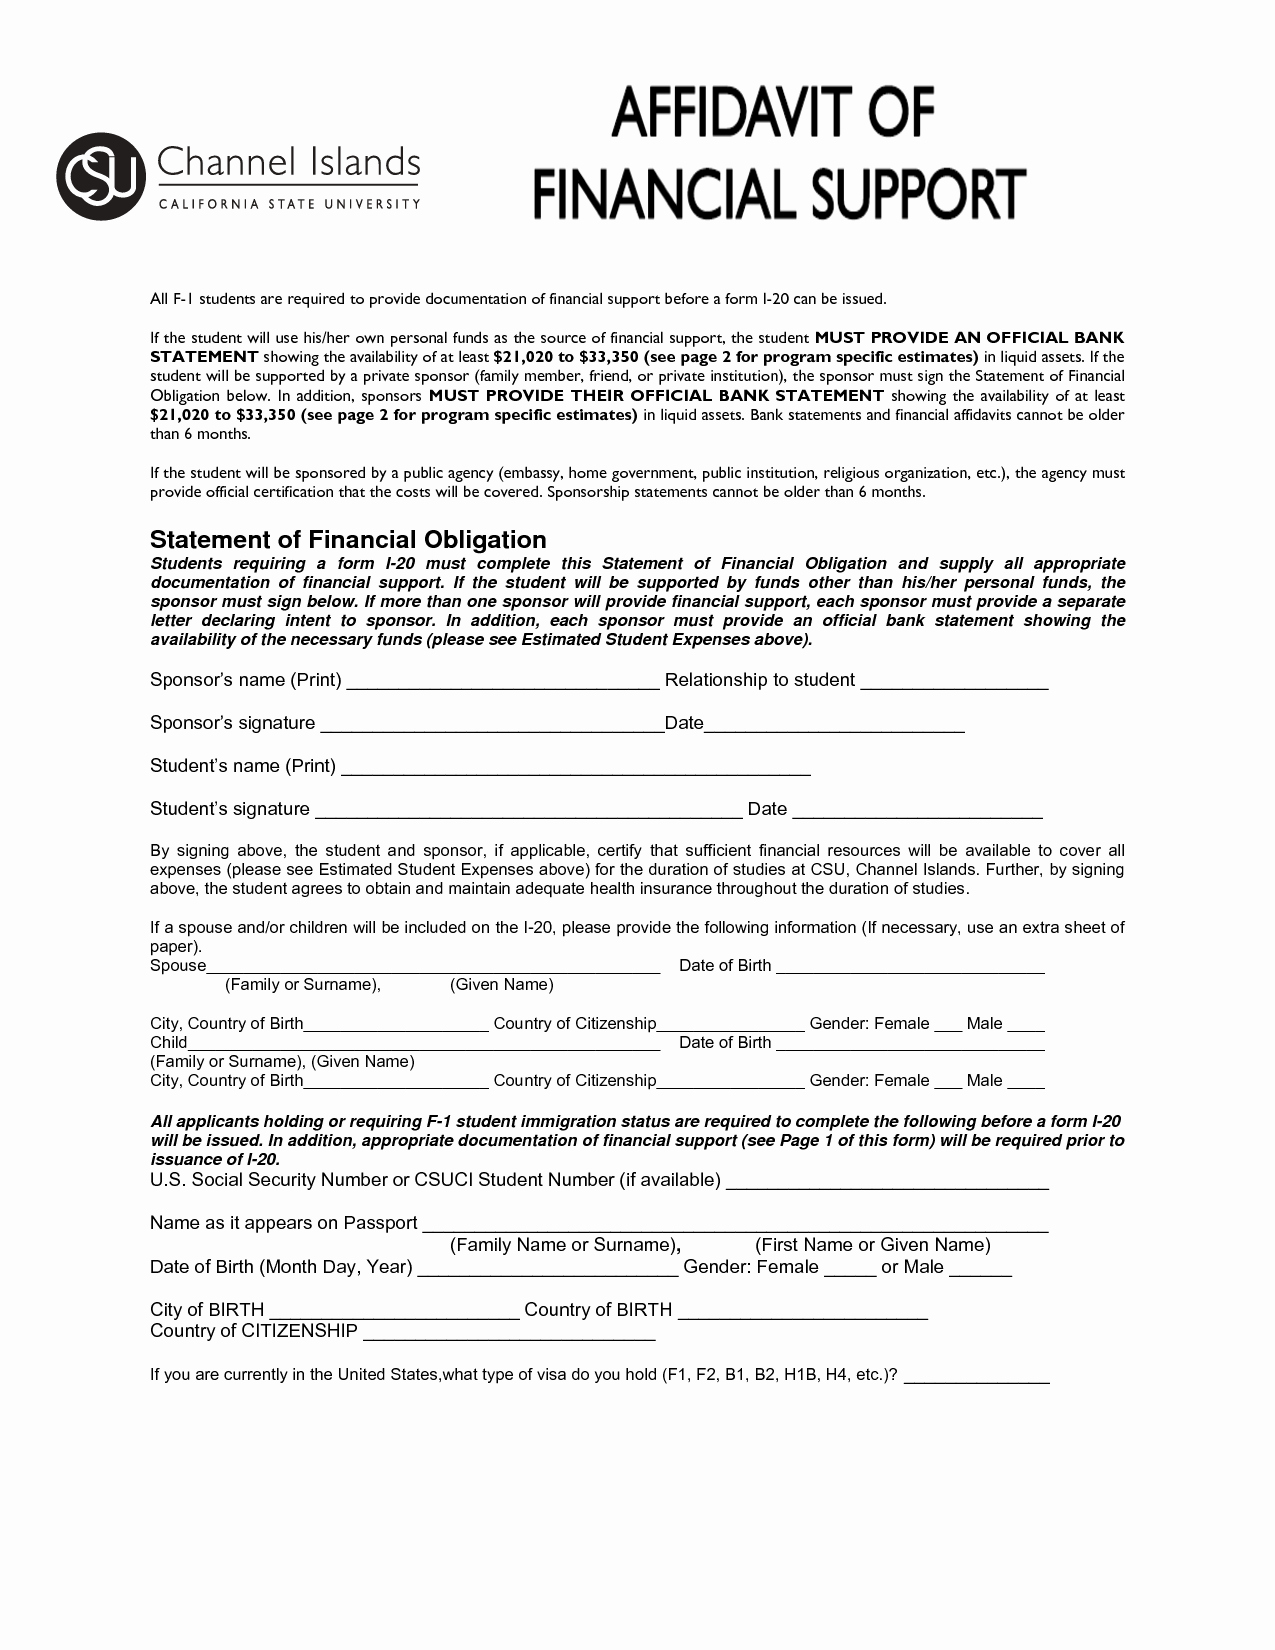 Affidavit Support Letter New Search Results Affidavit Financial Support Letter